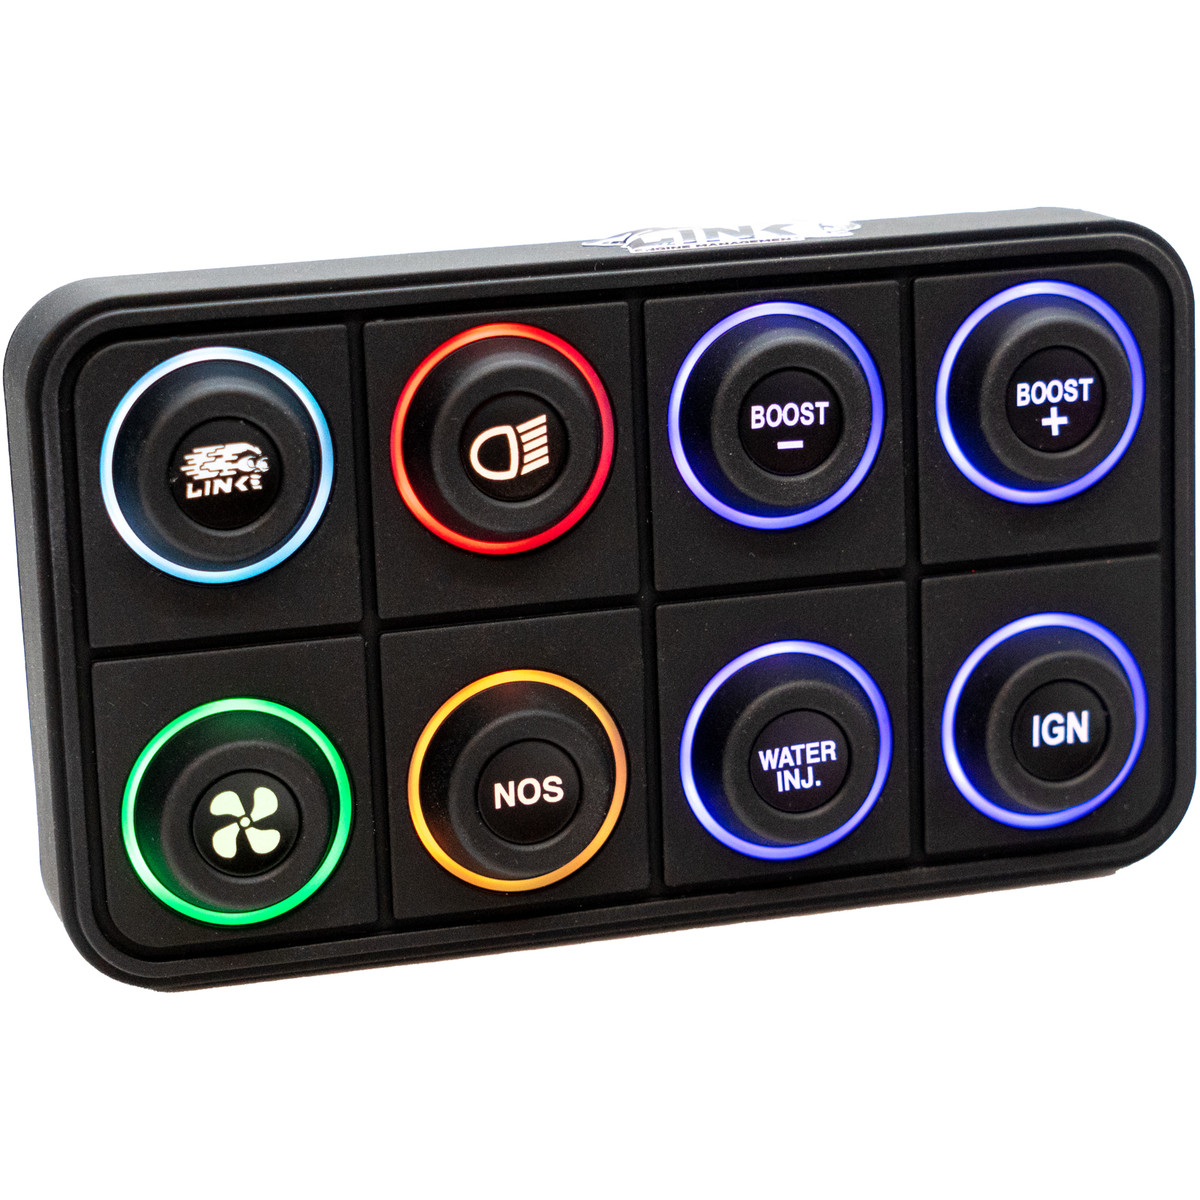 #CAN Keypad 8 button